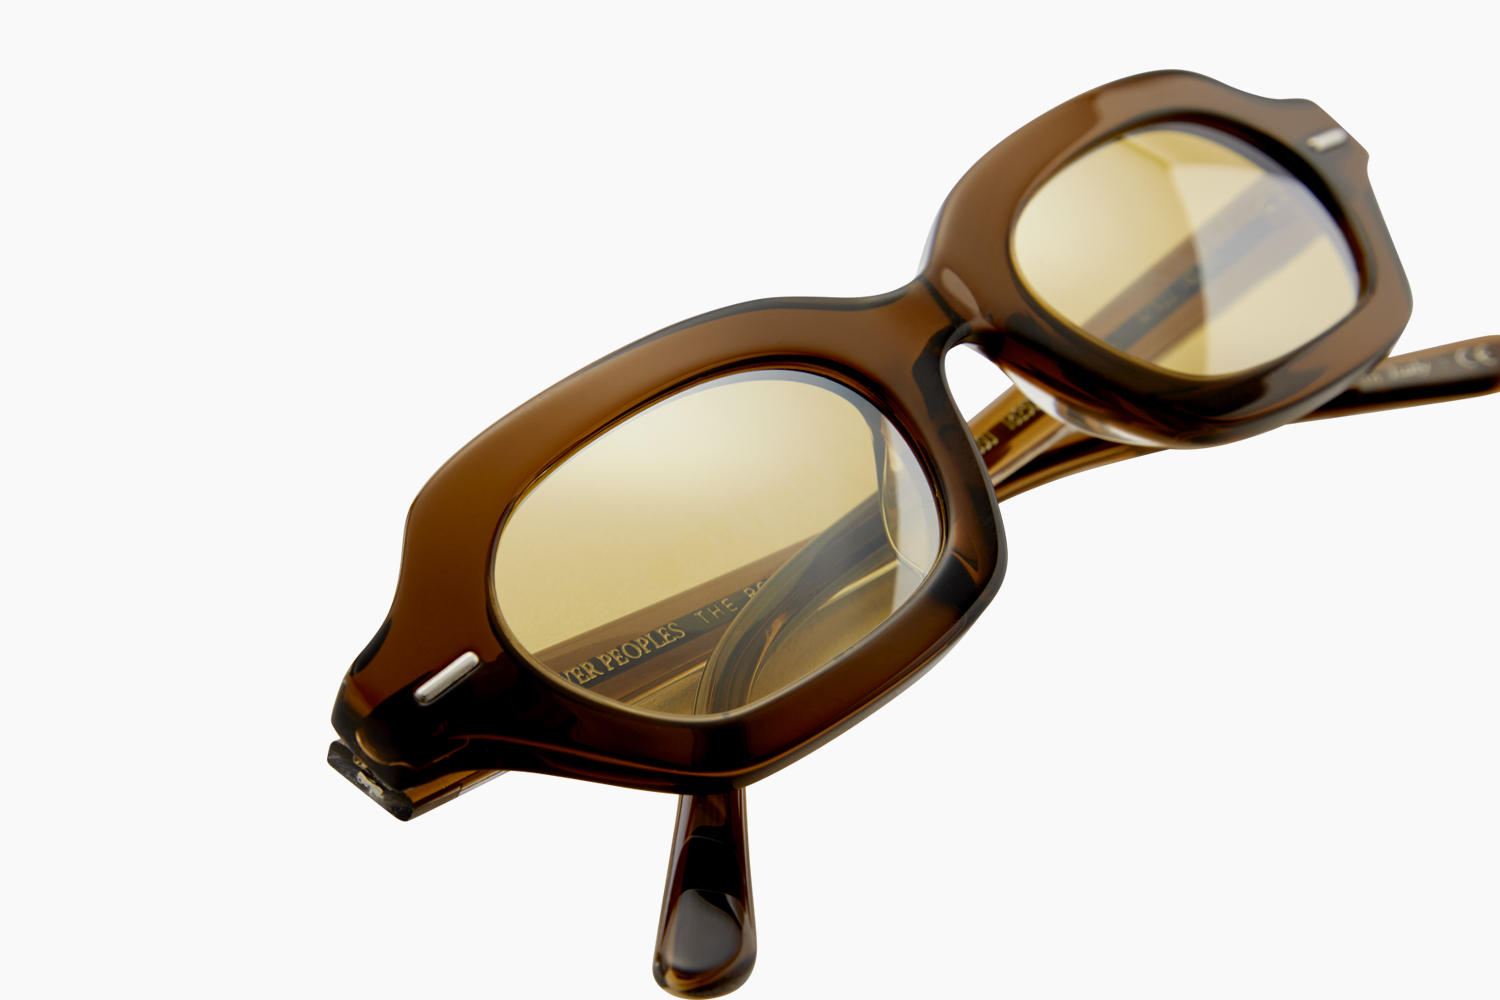 OLIVER PEOPLES THE ROW｜L.A. CC 5386SU - 16250F｜OLIVER PEOPLES